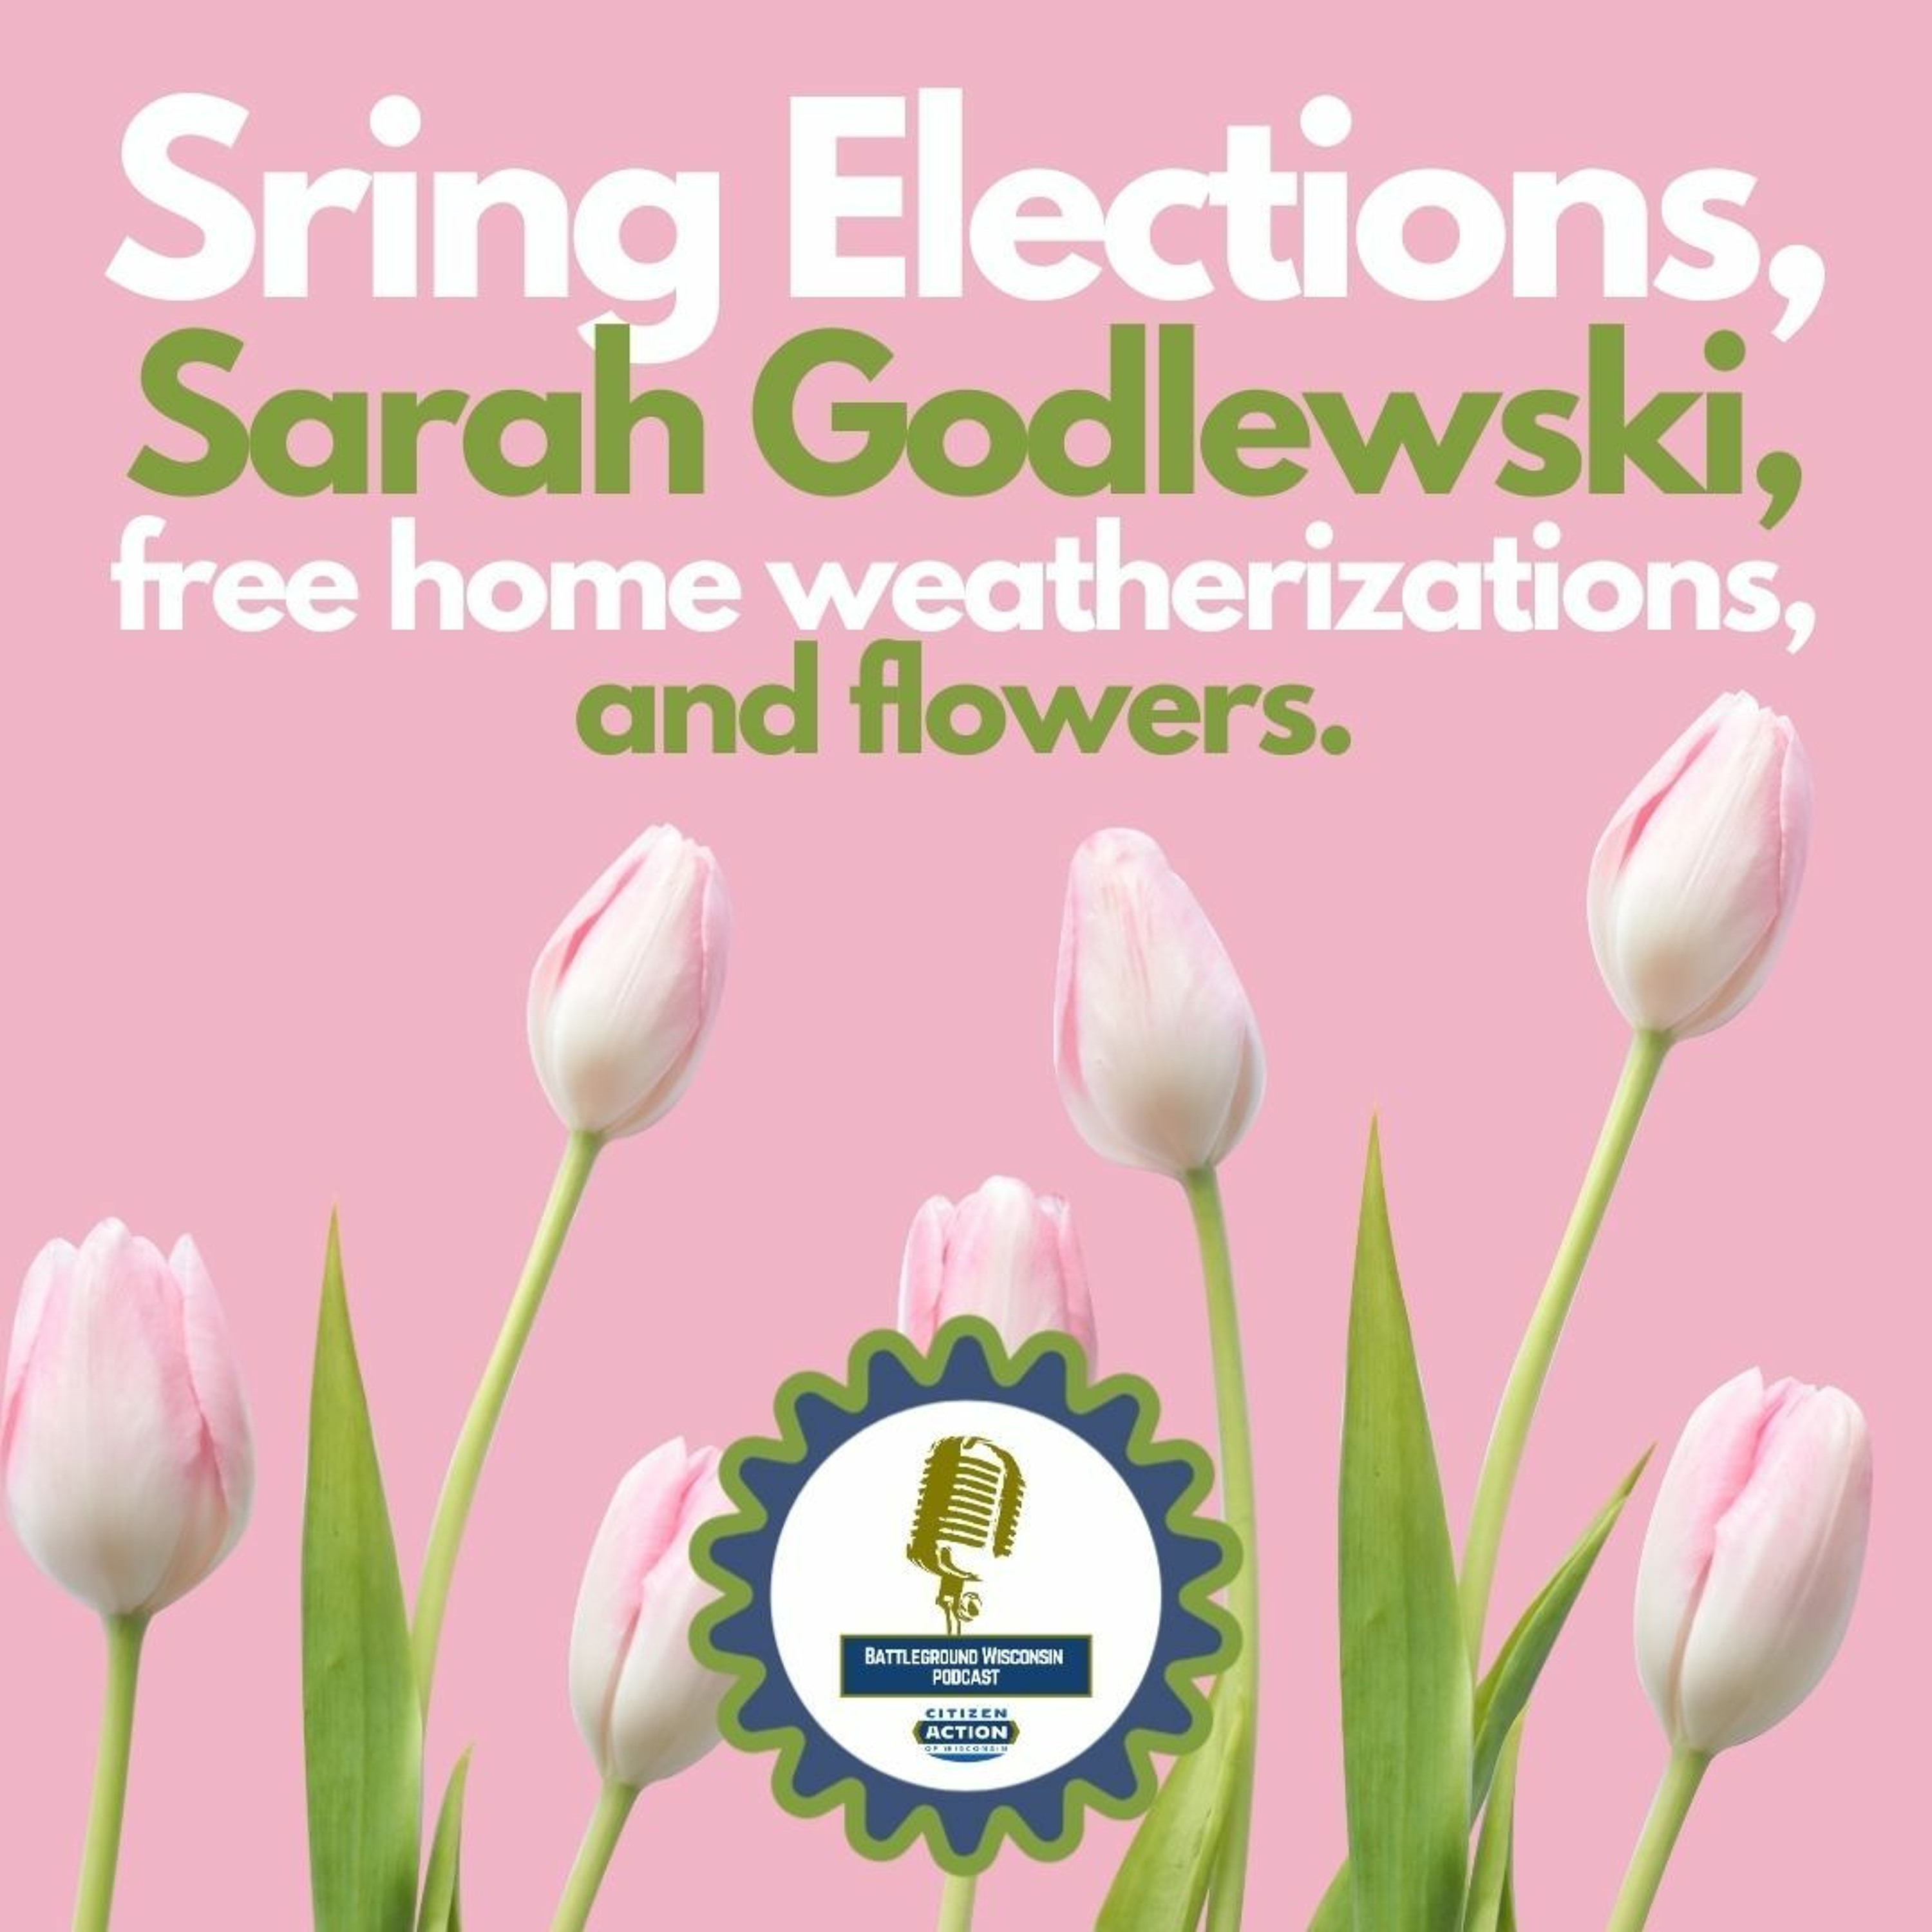 Spring Election, Sarah Godlewski, free home weatherizations, and flowers